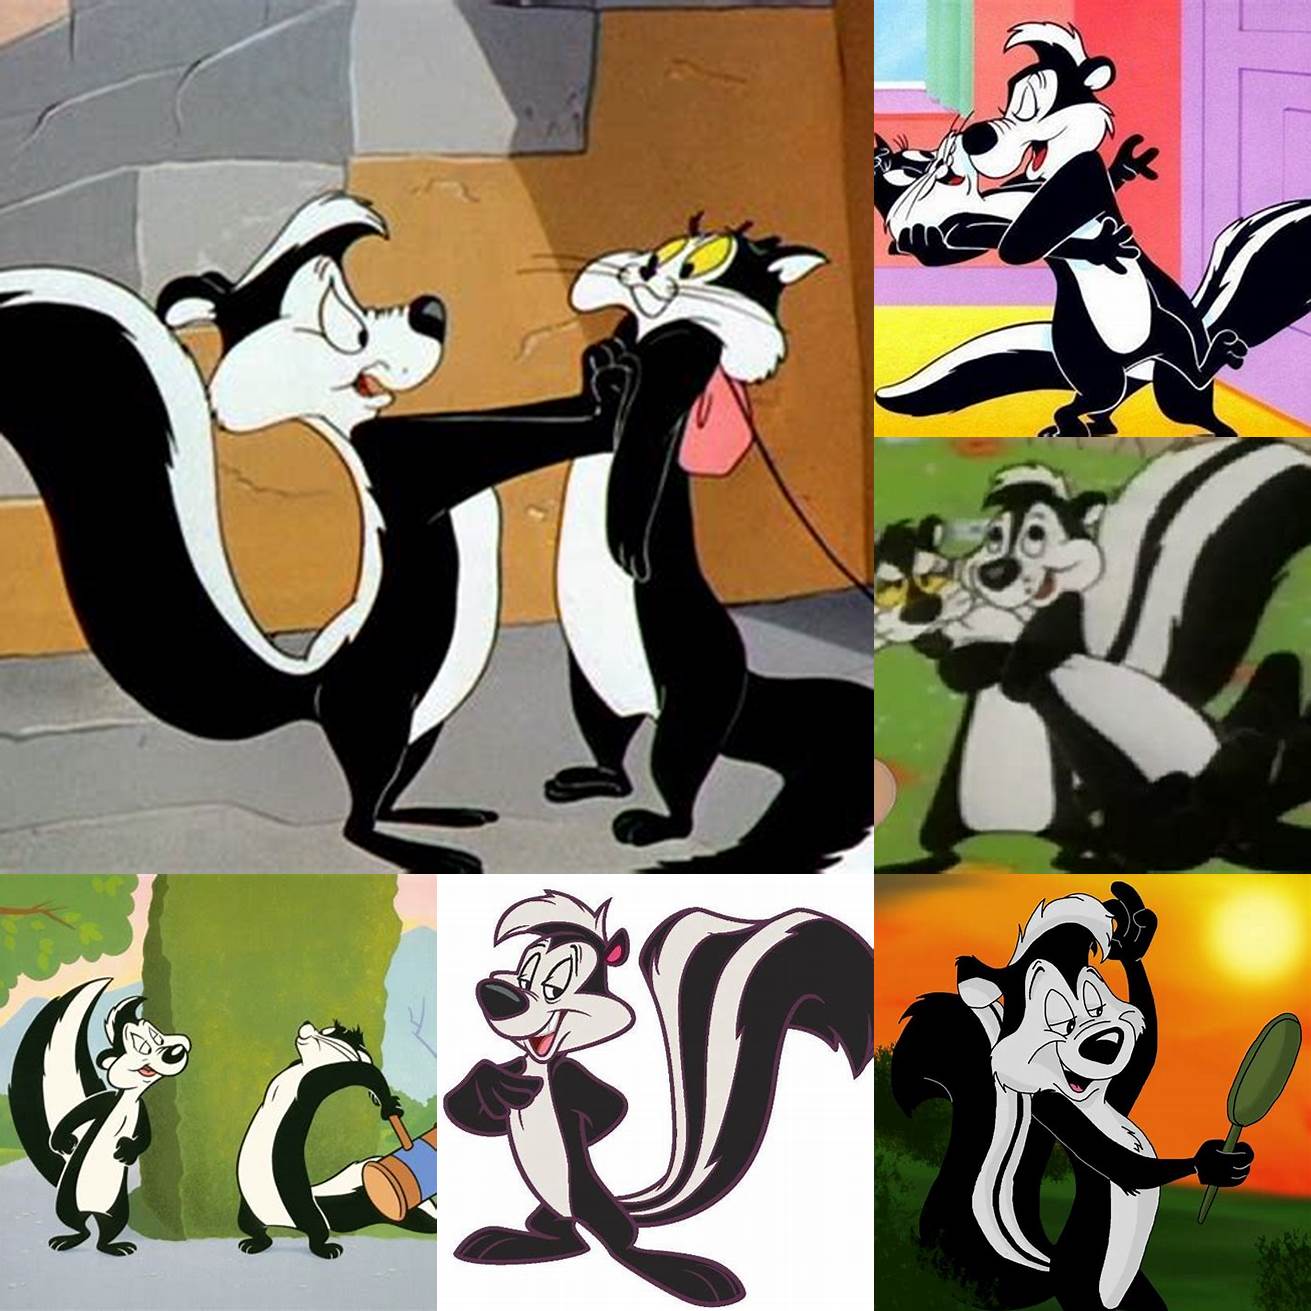 The cat from Pepe Le Pew has a complex personality